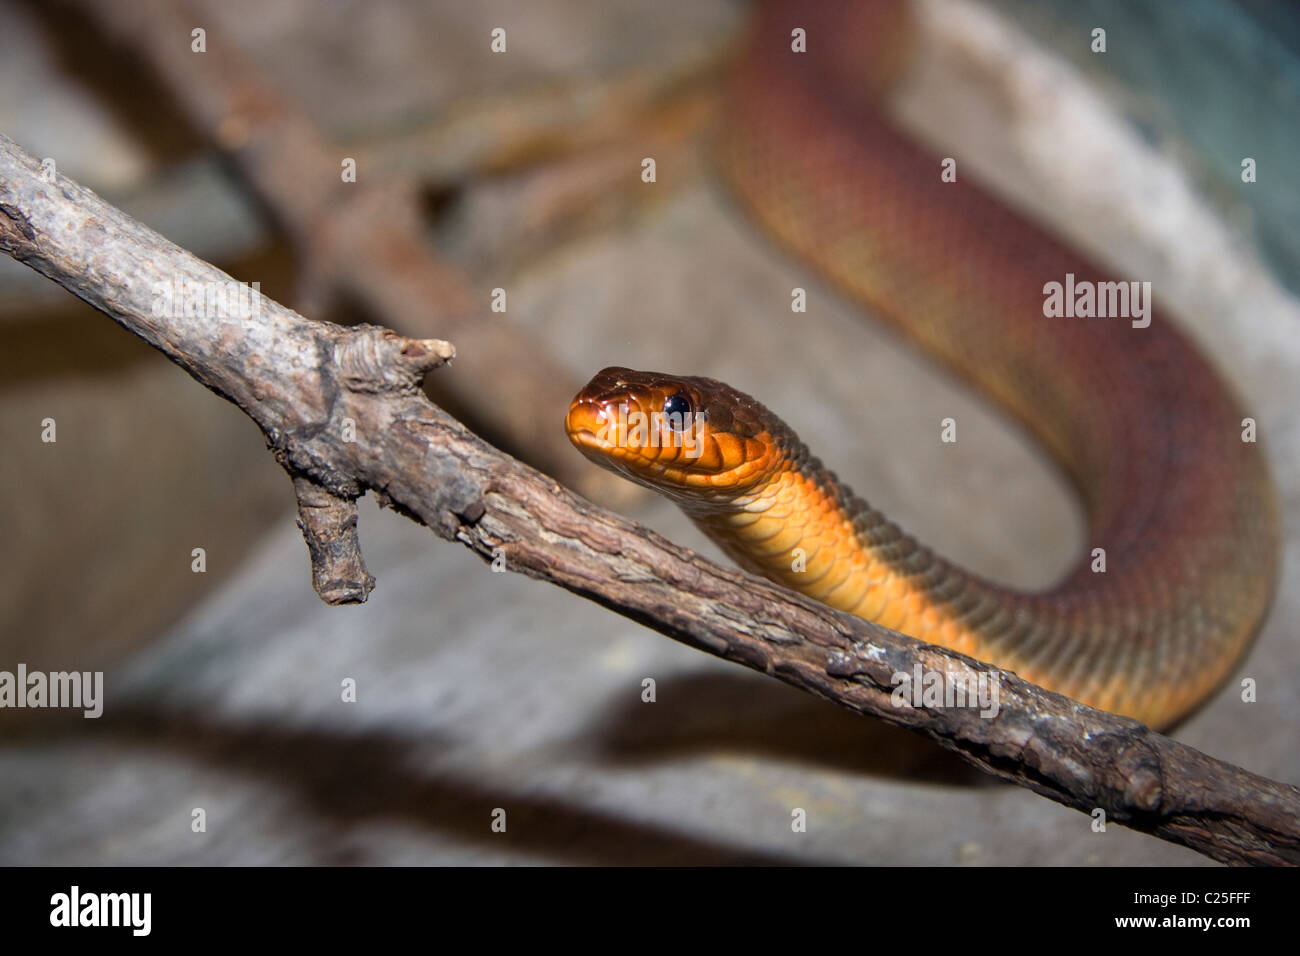 Red-bellied Watersnake (Nerodia erythrogaster) Stock Photo